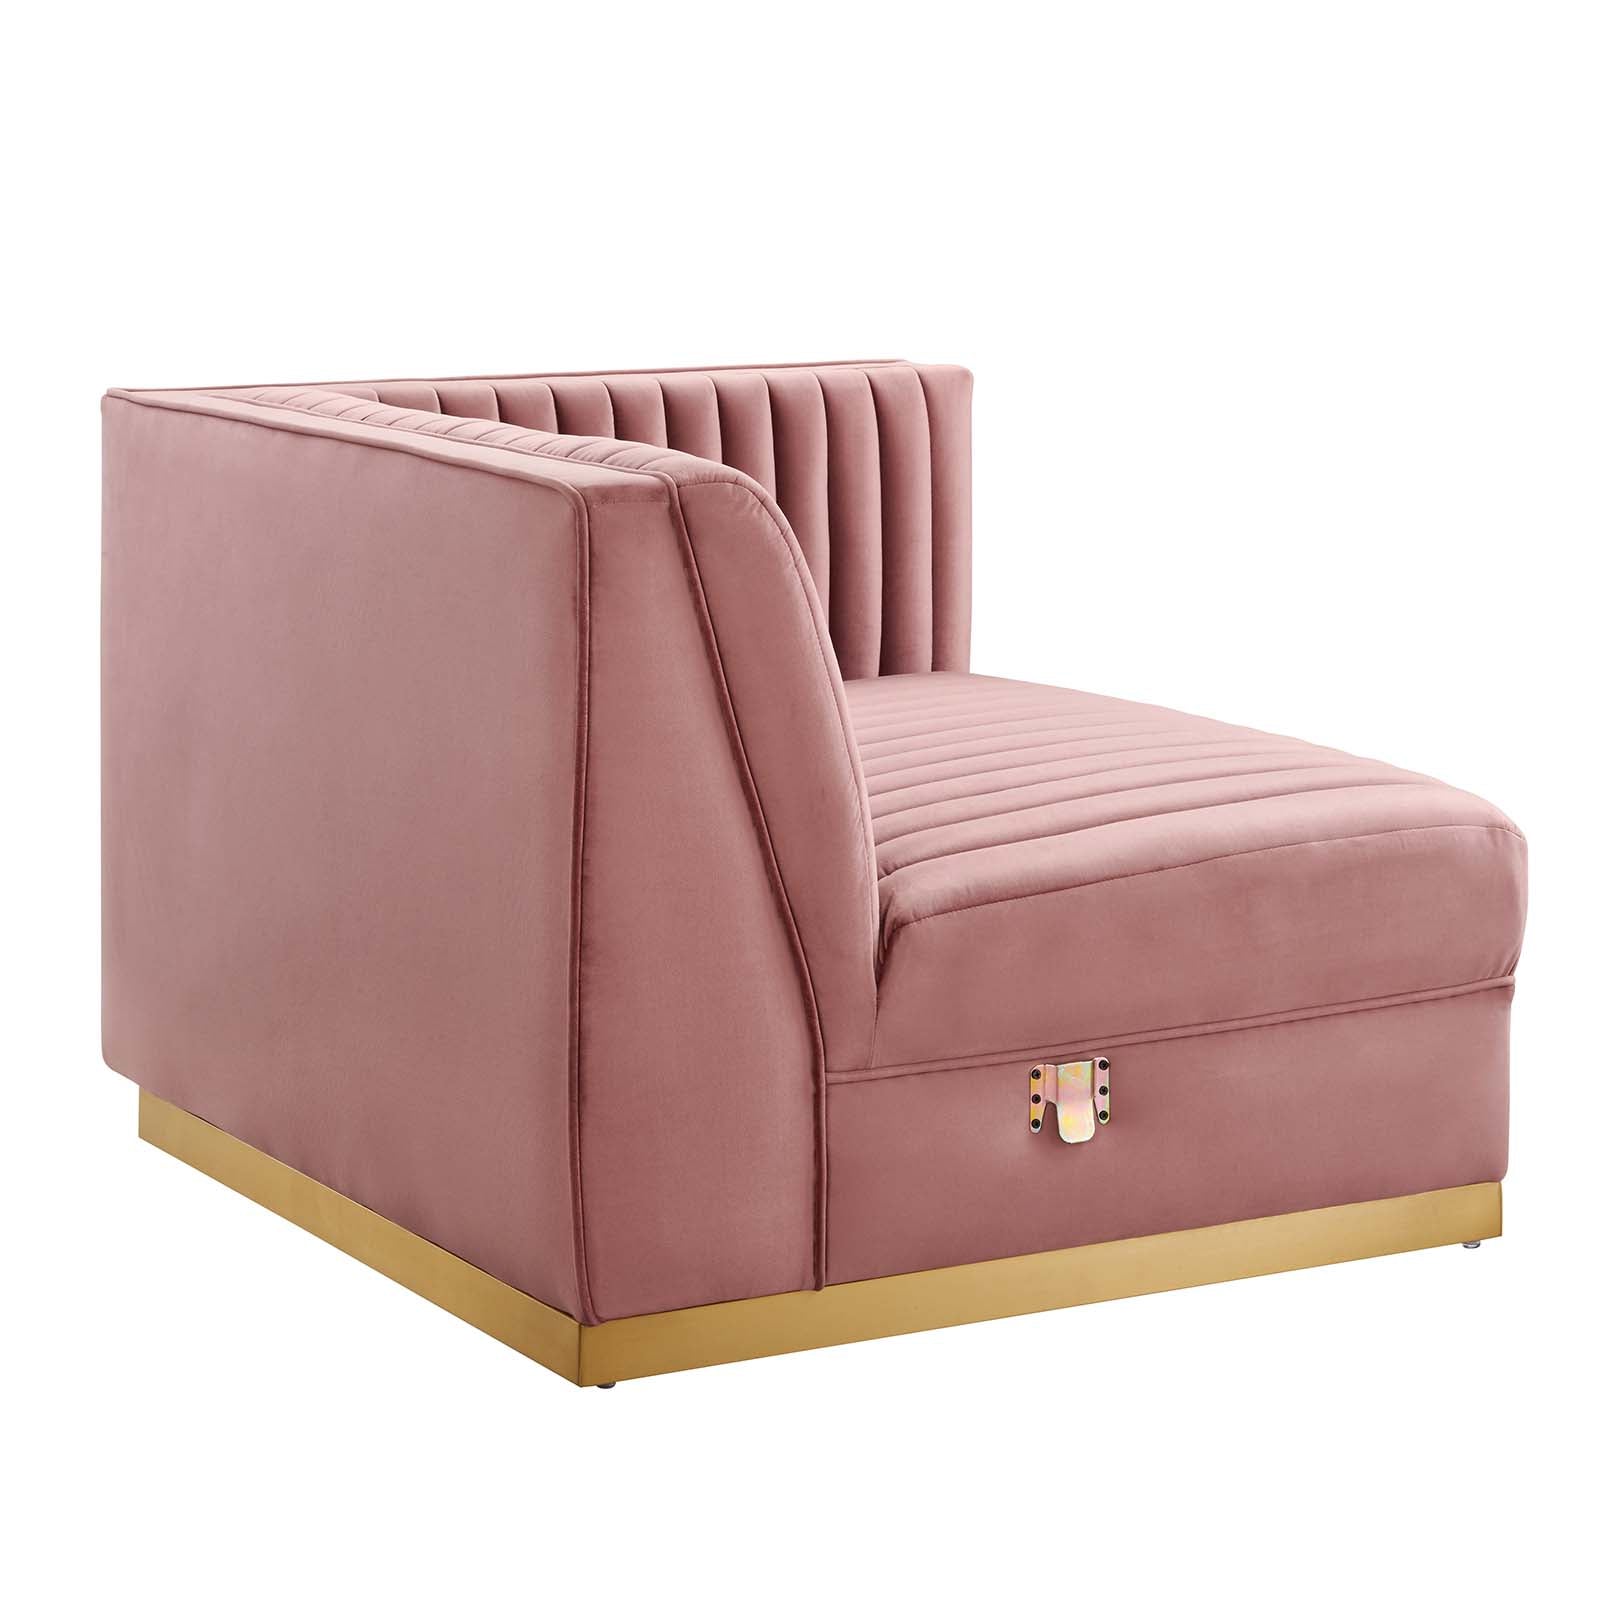 Modway Sectional Sofas - Sanguine Channel Tufted Performance Velvet 5 Piece Right-Facing Modular Sectional Sofa Dusty Rose